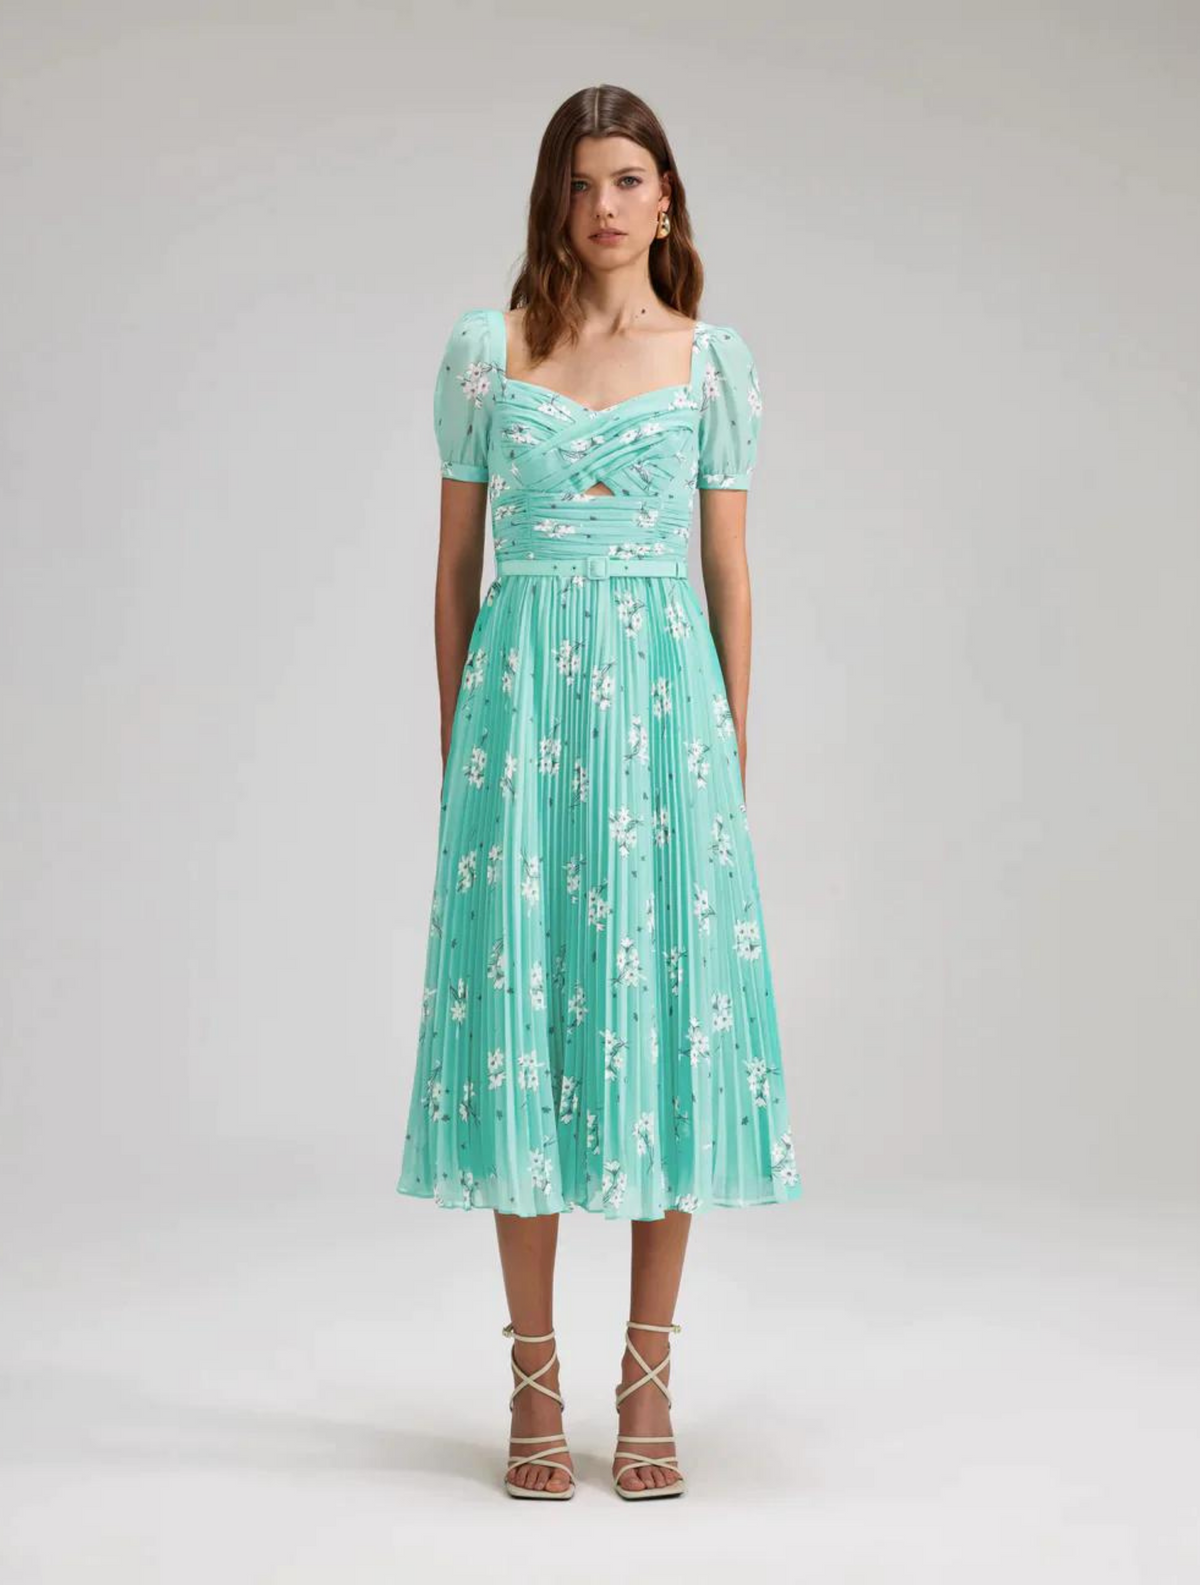 Aqua chiffon midi dress with short sleeves and pleated skirt with all over ivory floral print